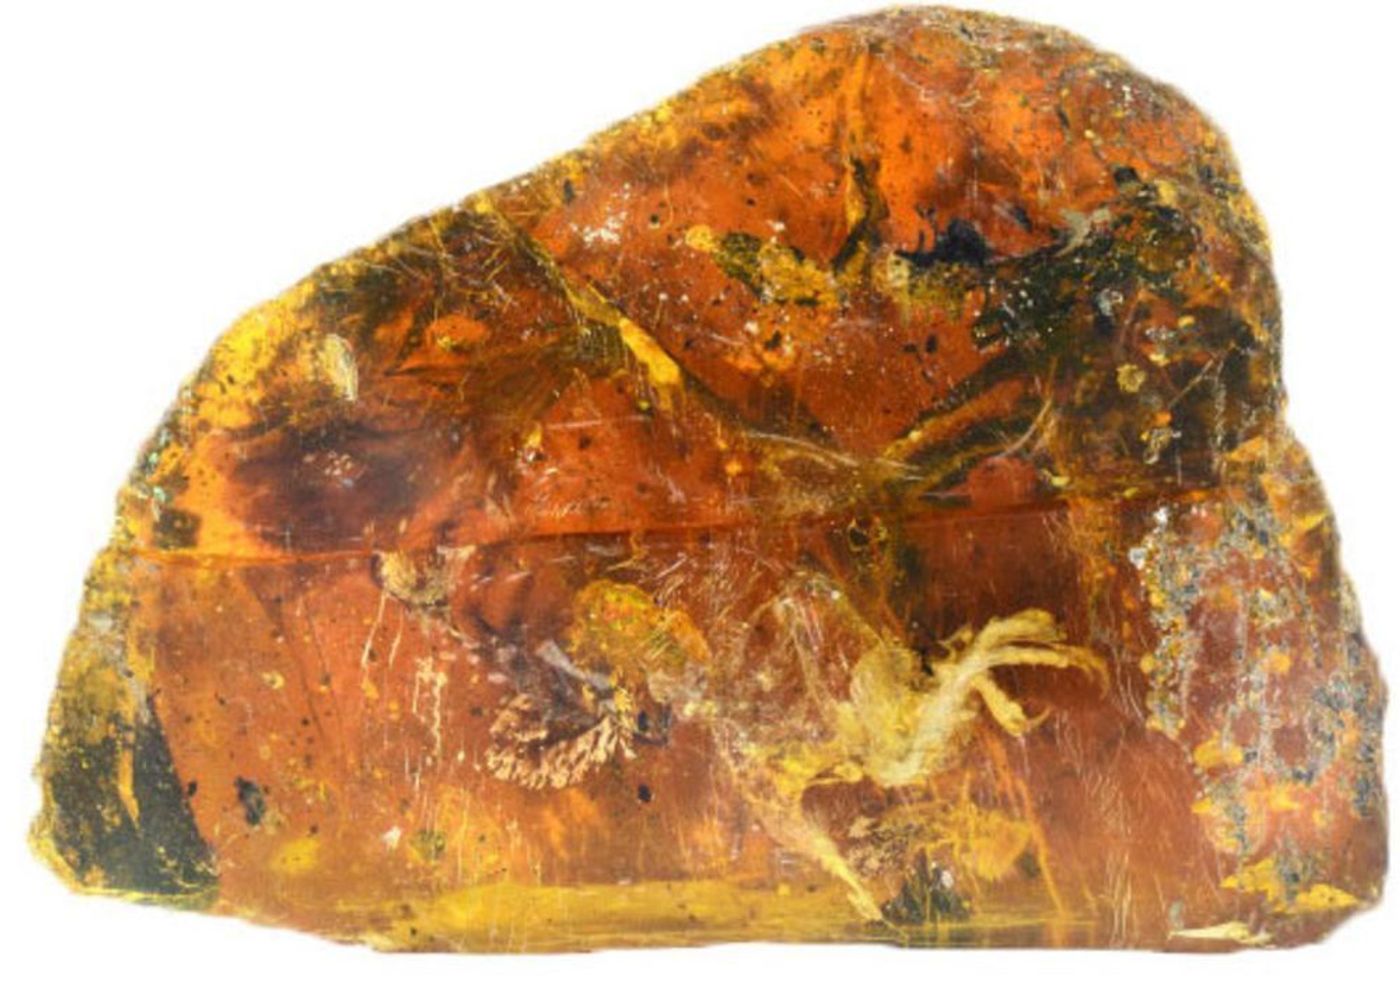 Belone is almost perfectly-preserved inside of this small fragment of amber.